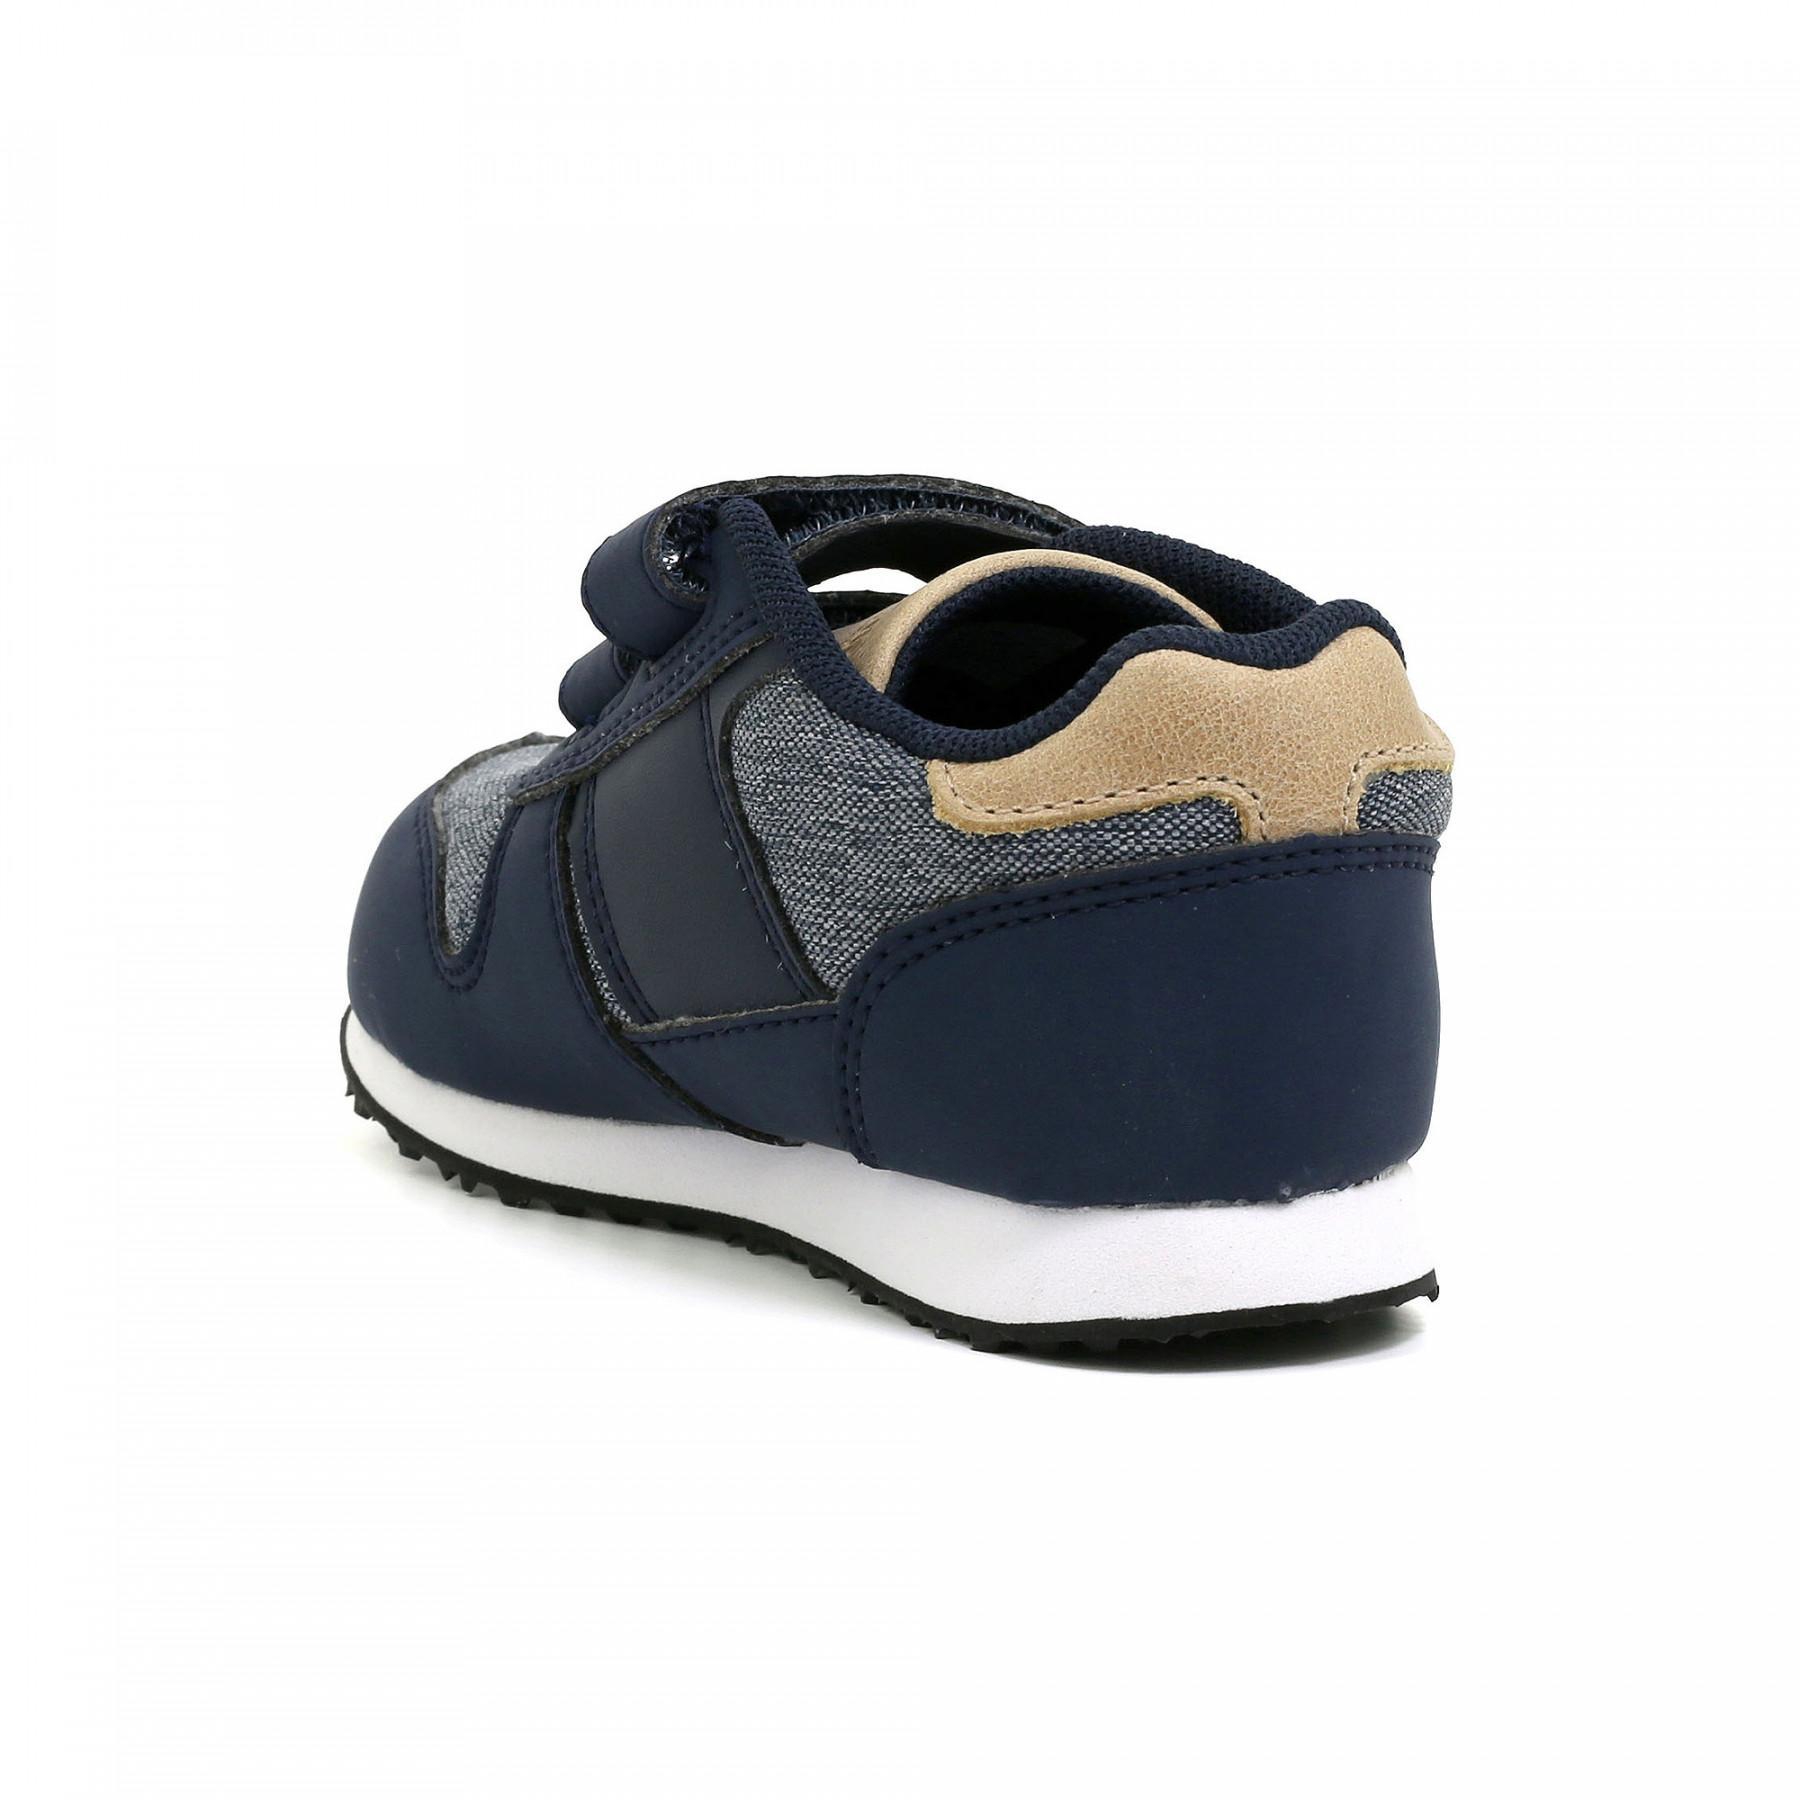 Kindertrainers Le Coq Sportif Jazy classic inf